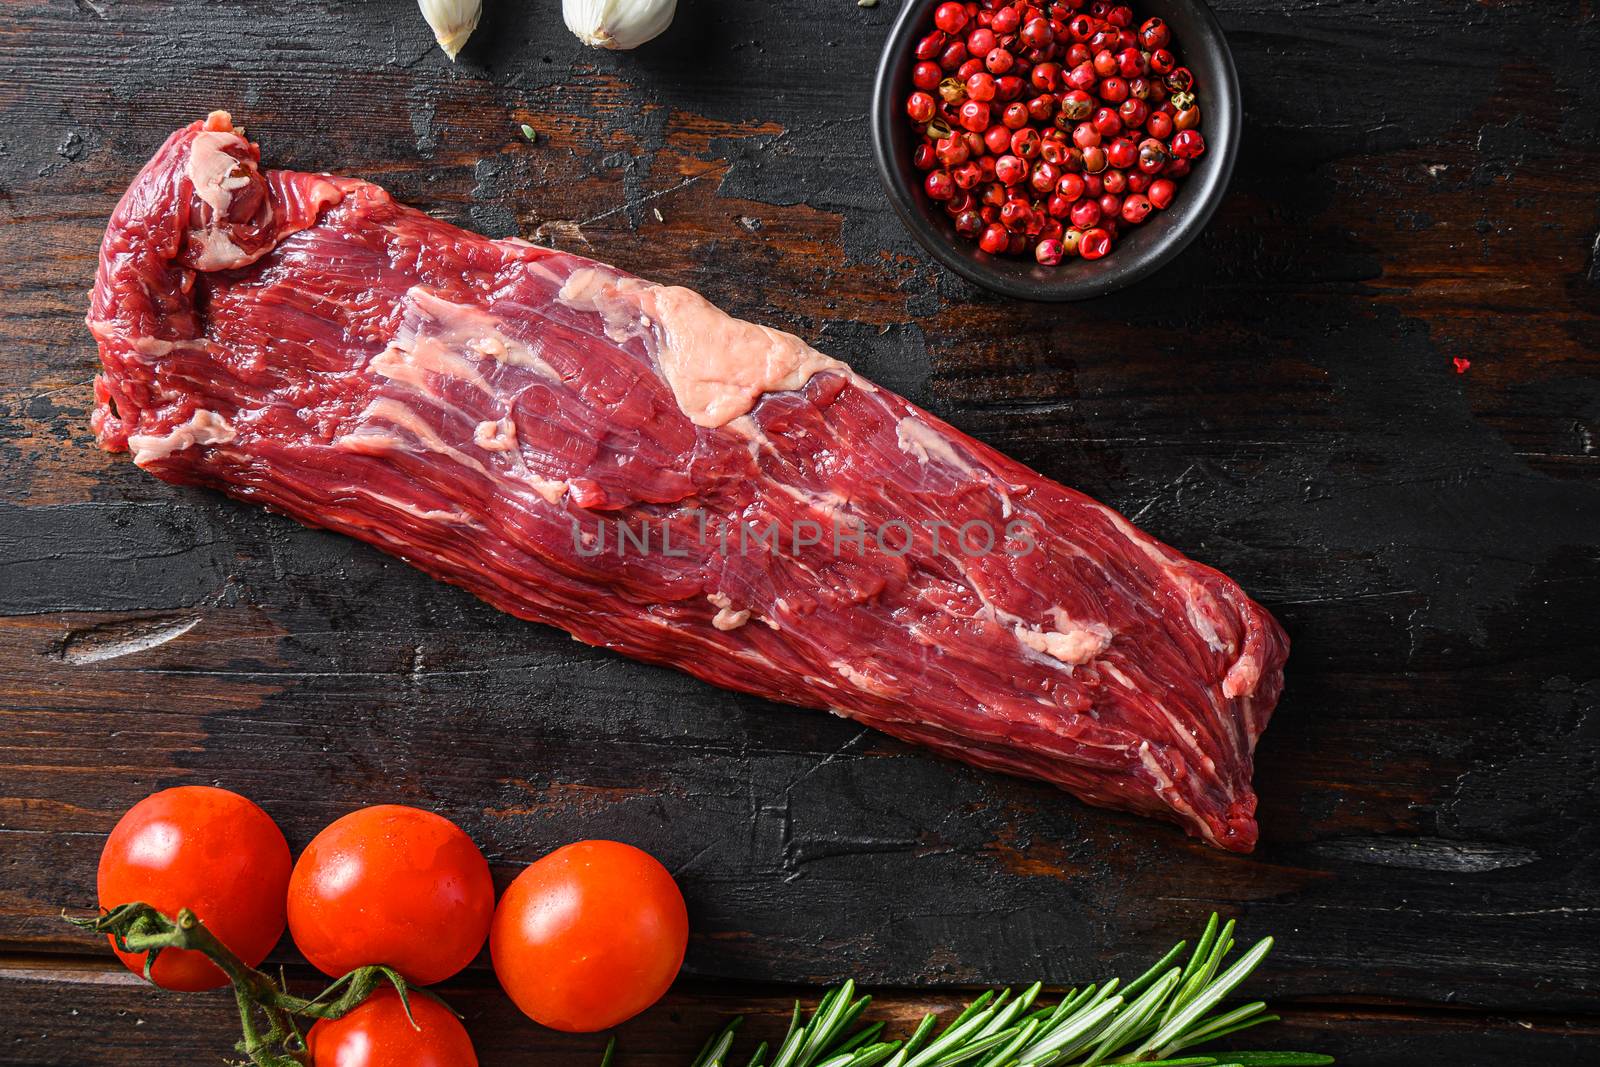 Machete steak raw alternative beef cut or hanging tende cut, with rosemary over wood background Top side view.